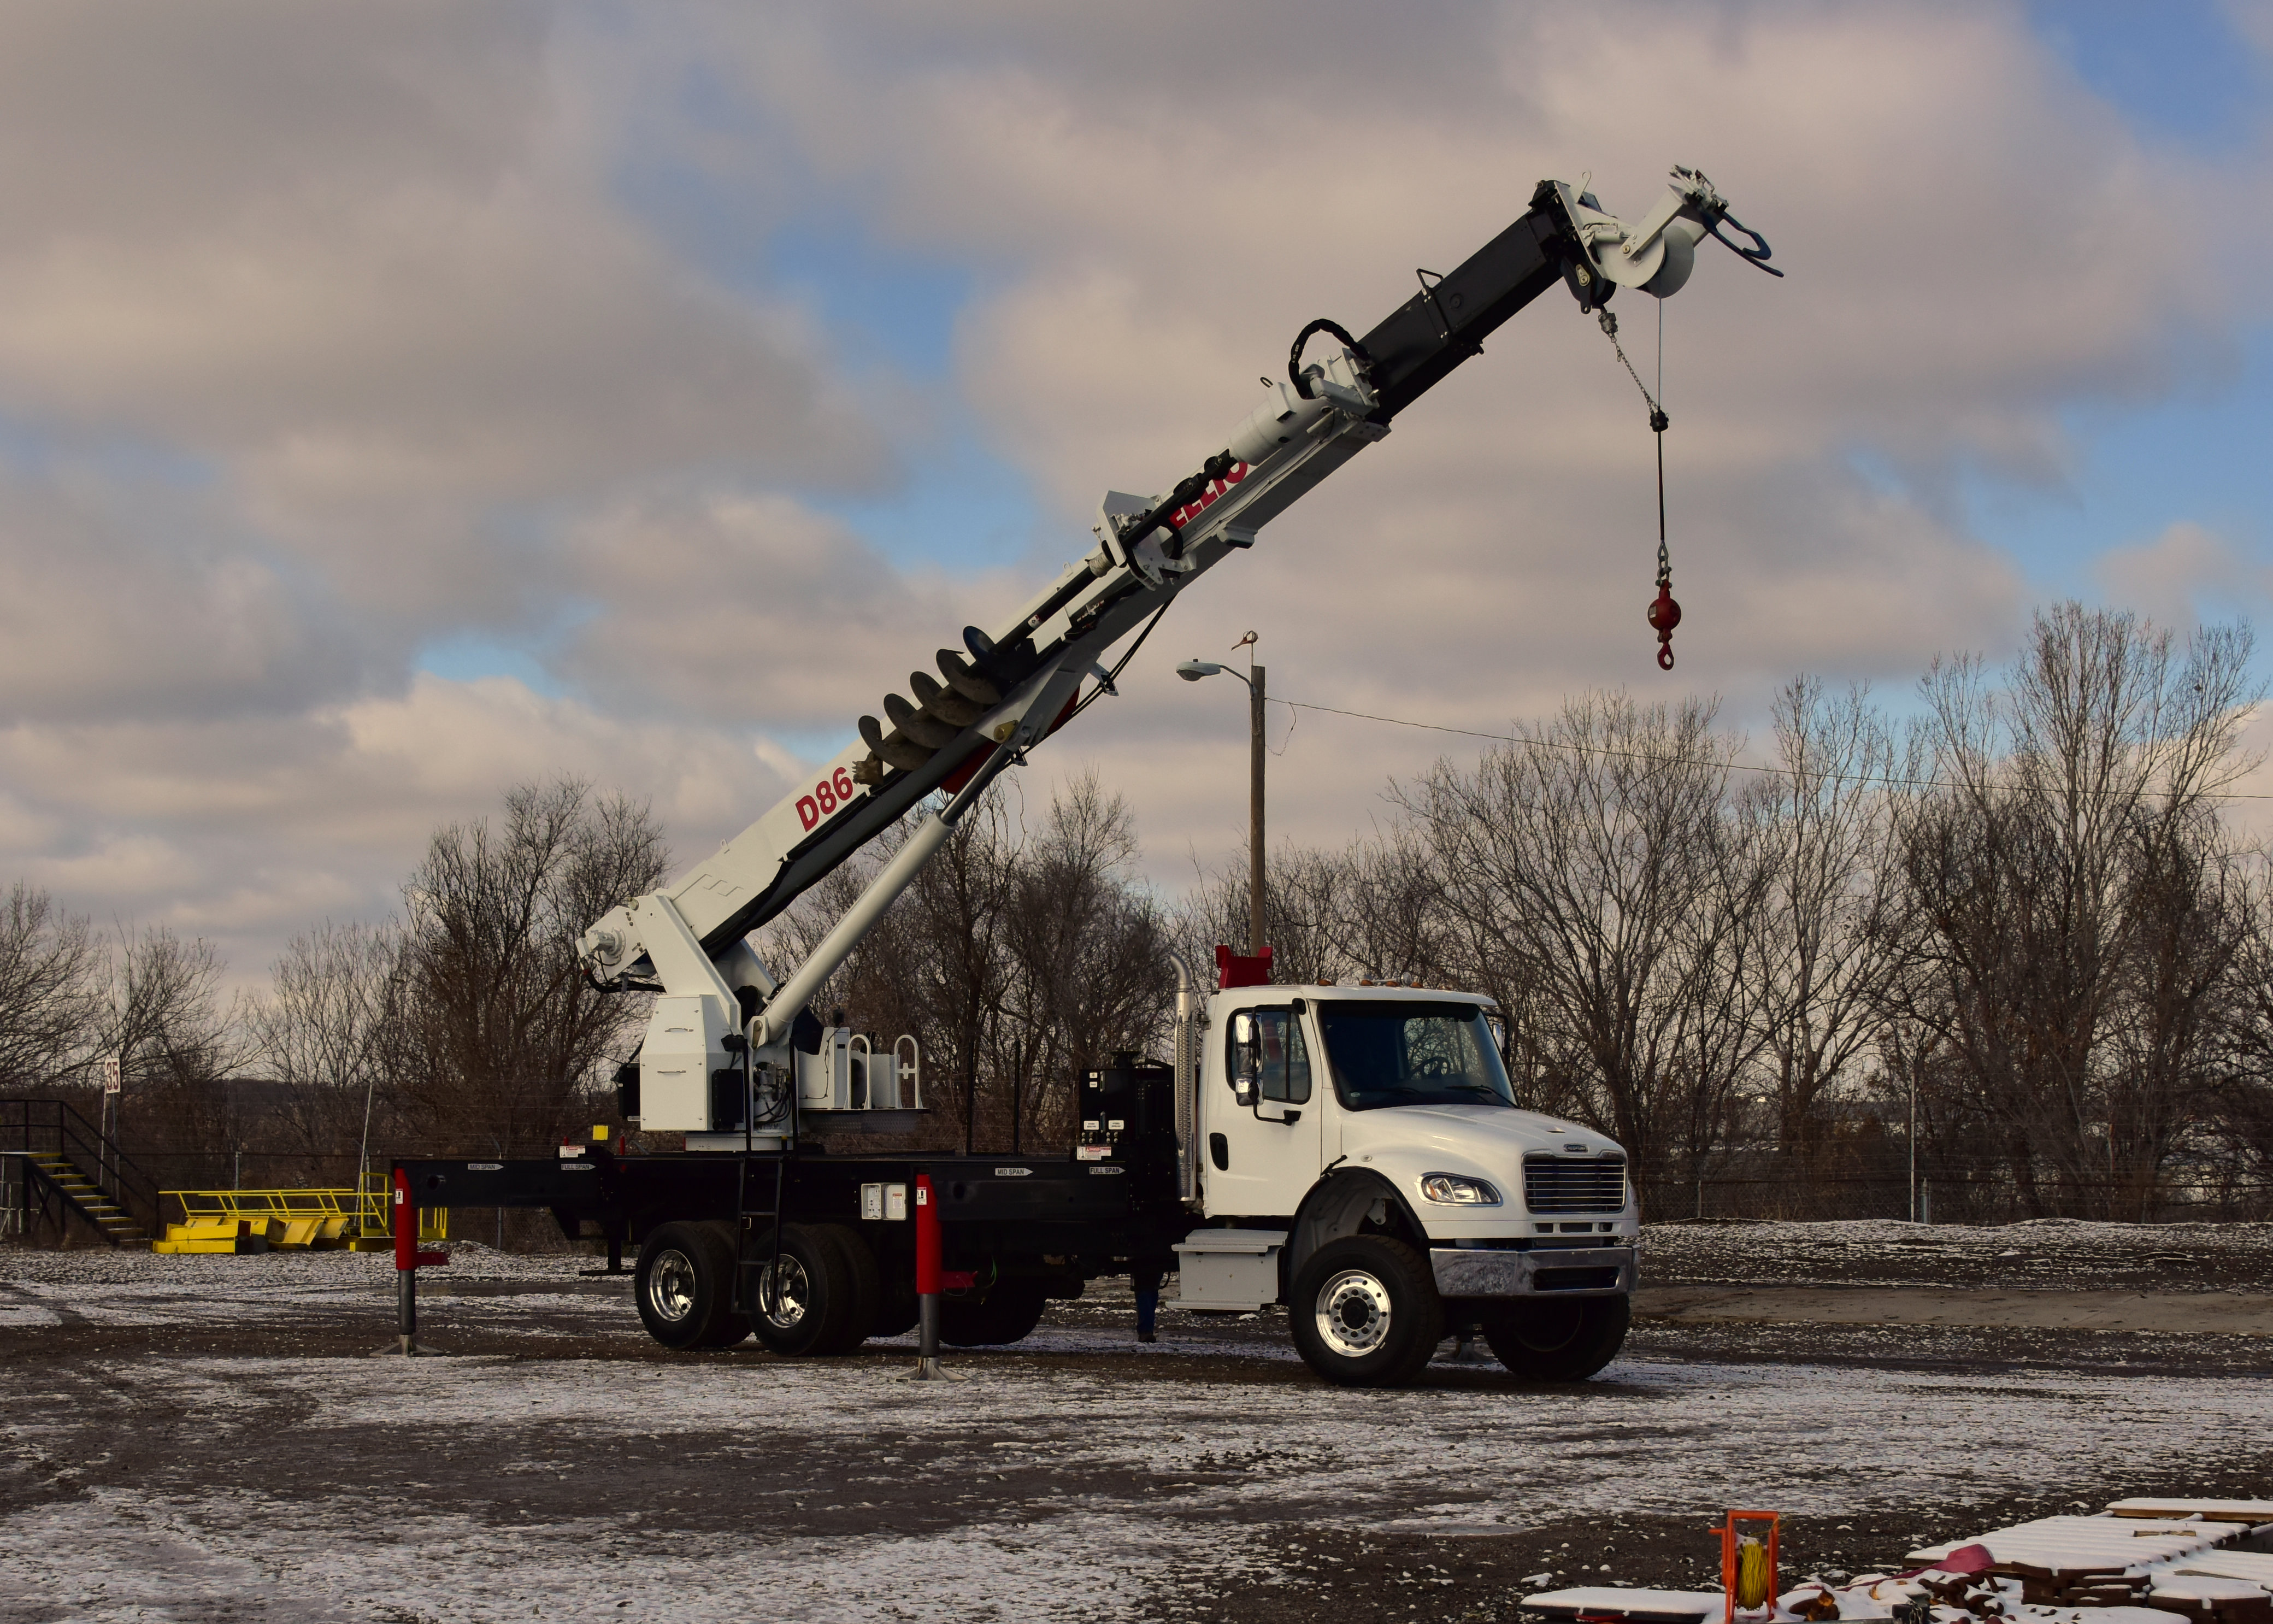 Elliott digger derrick truck crane in lot with snow on the ground